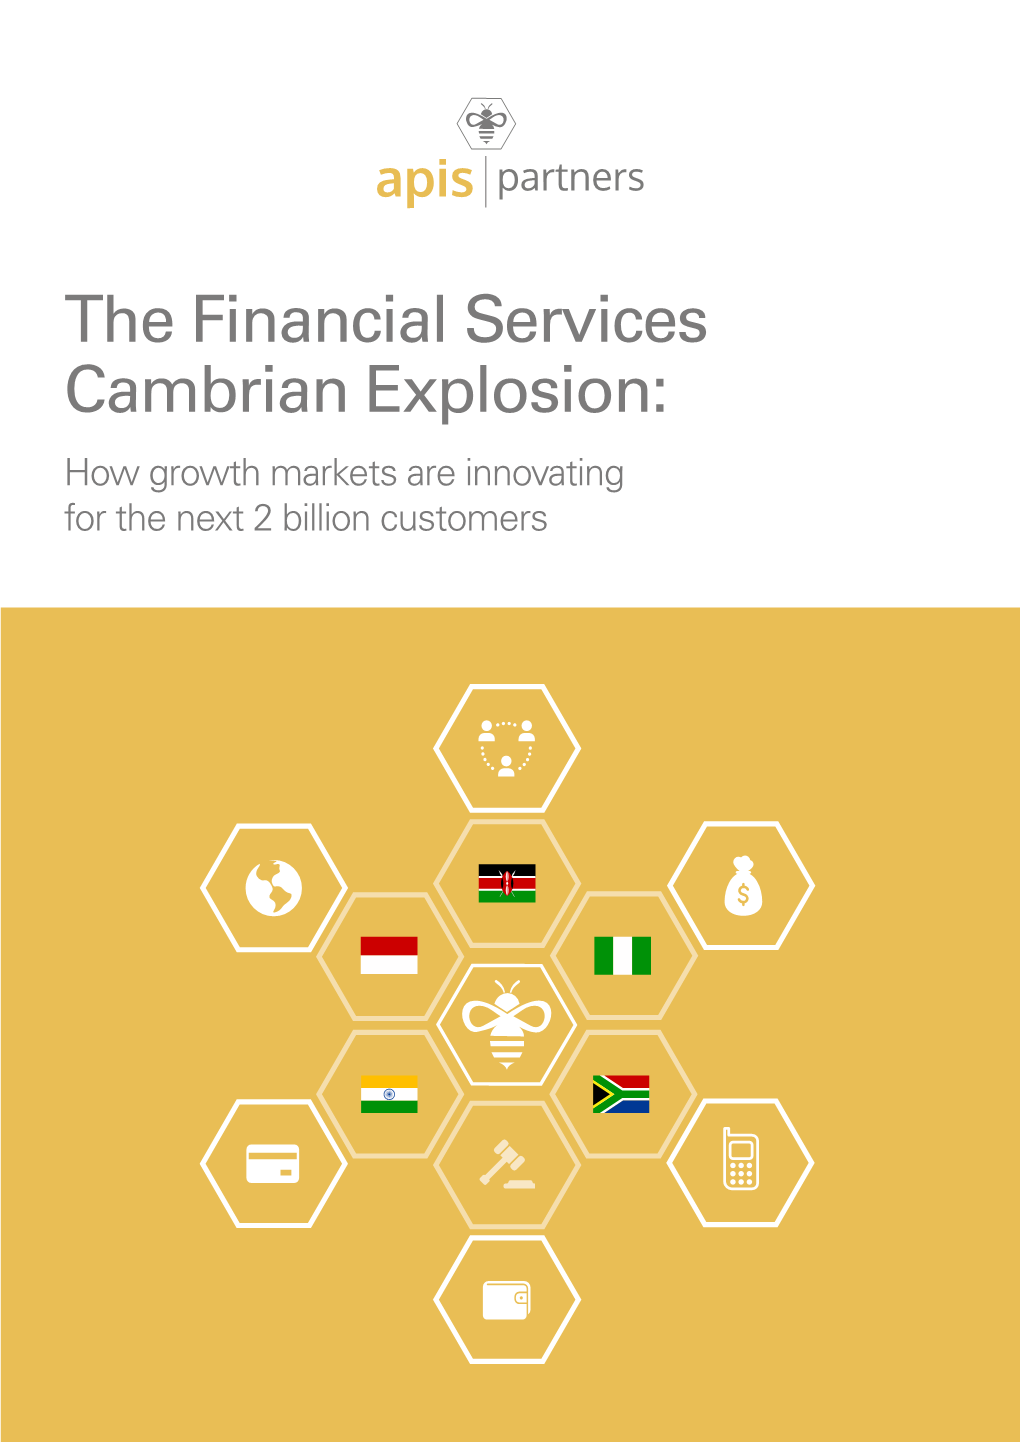 The Financial Services Cambrian Explosion: How Growth Markets Are Innovating for the Next 2 Billion Customers Factsheet